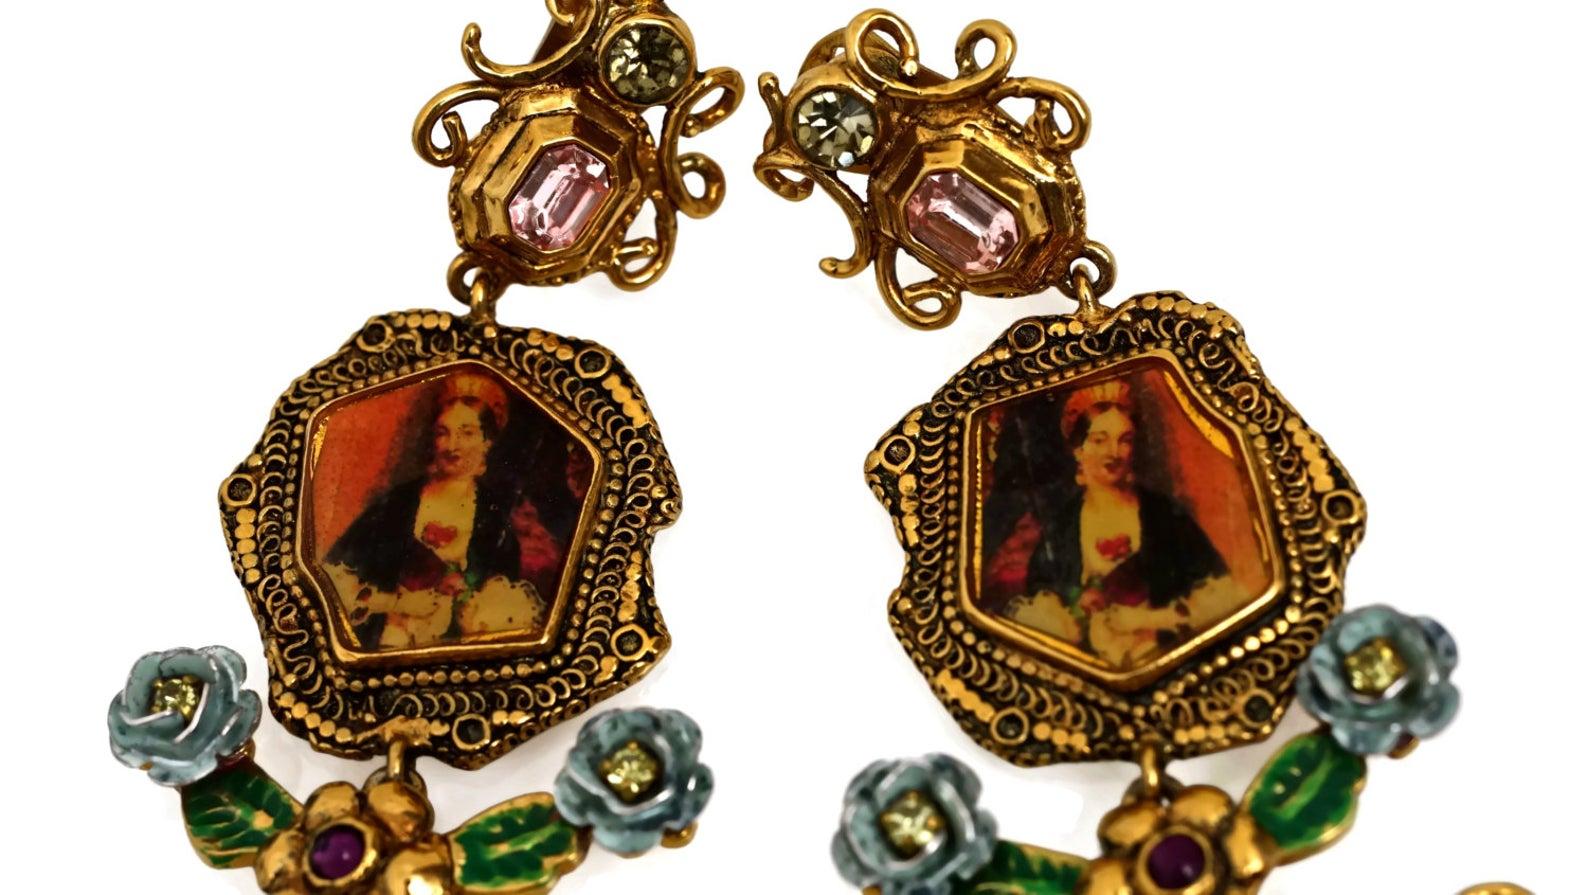 Vintage RARE CHRISTIAN LACROIX Baroque Portrait Cameo Earrings

Measurements:
Height: 4 3/8 inches
Width: 1 5/8 inches

Features:
- 100% Authentic CHRISTIAN LACROIX.
- Lady portrait on a frame.
- Embellished with faceted rhinestones, enamel flowers